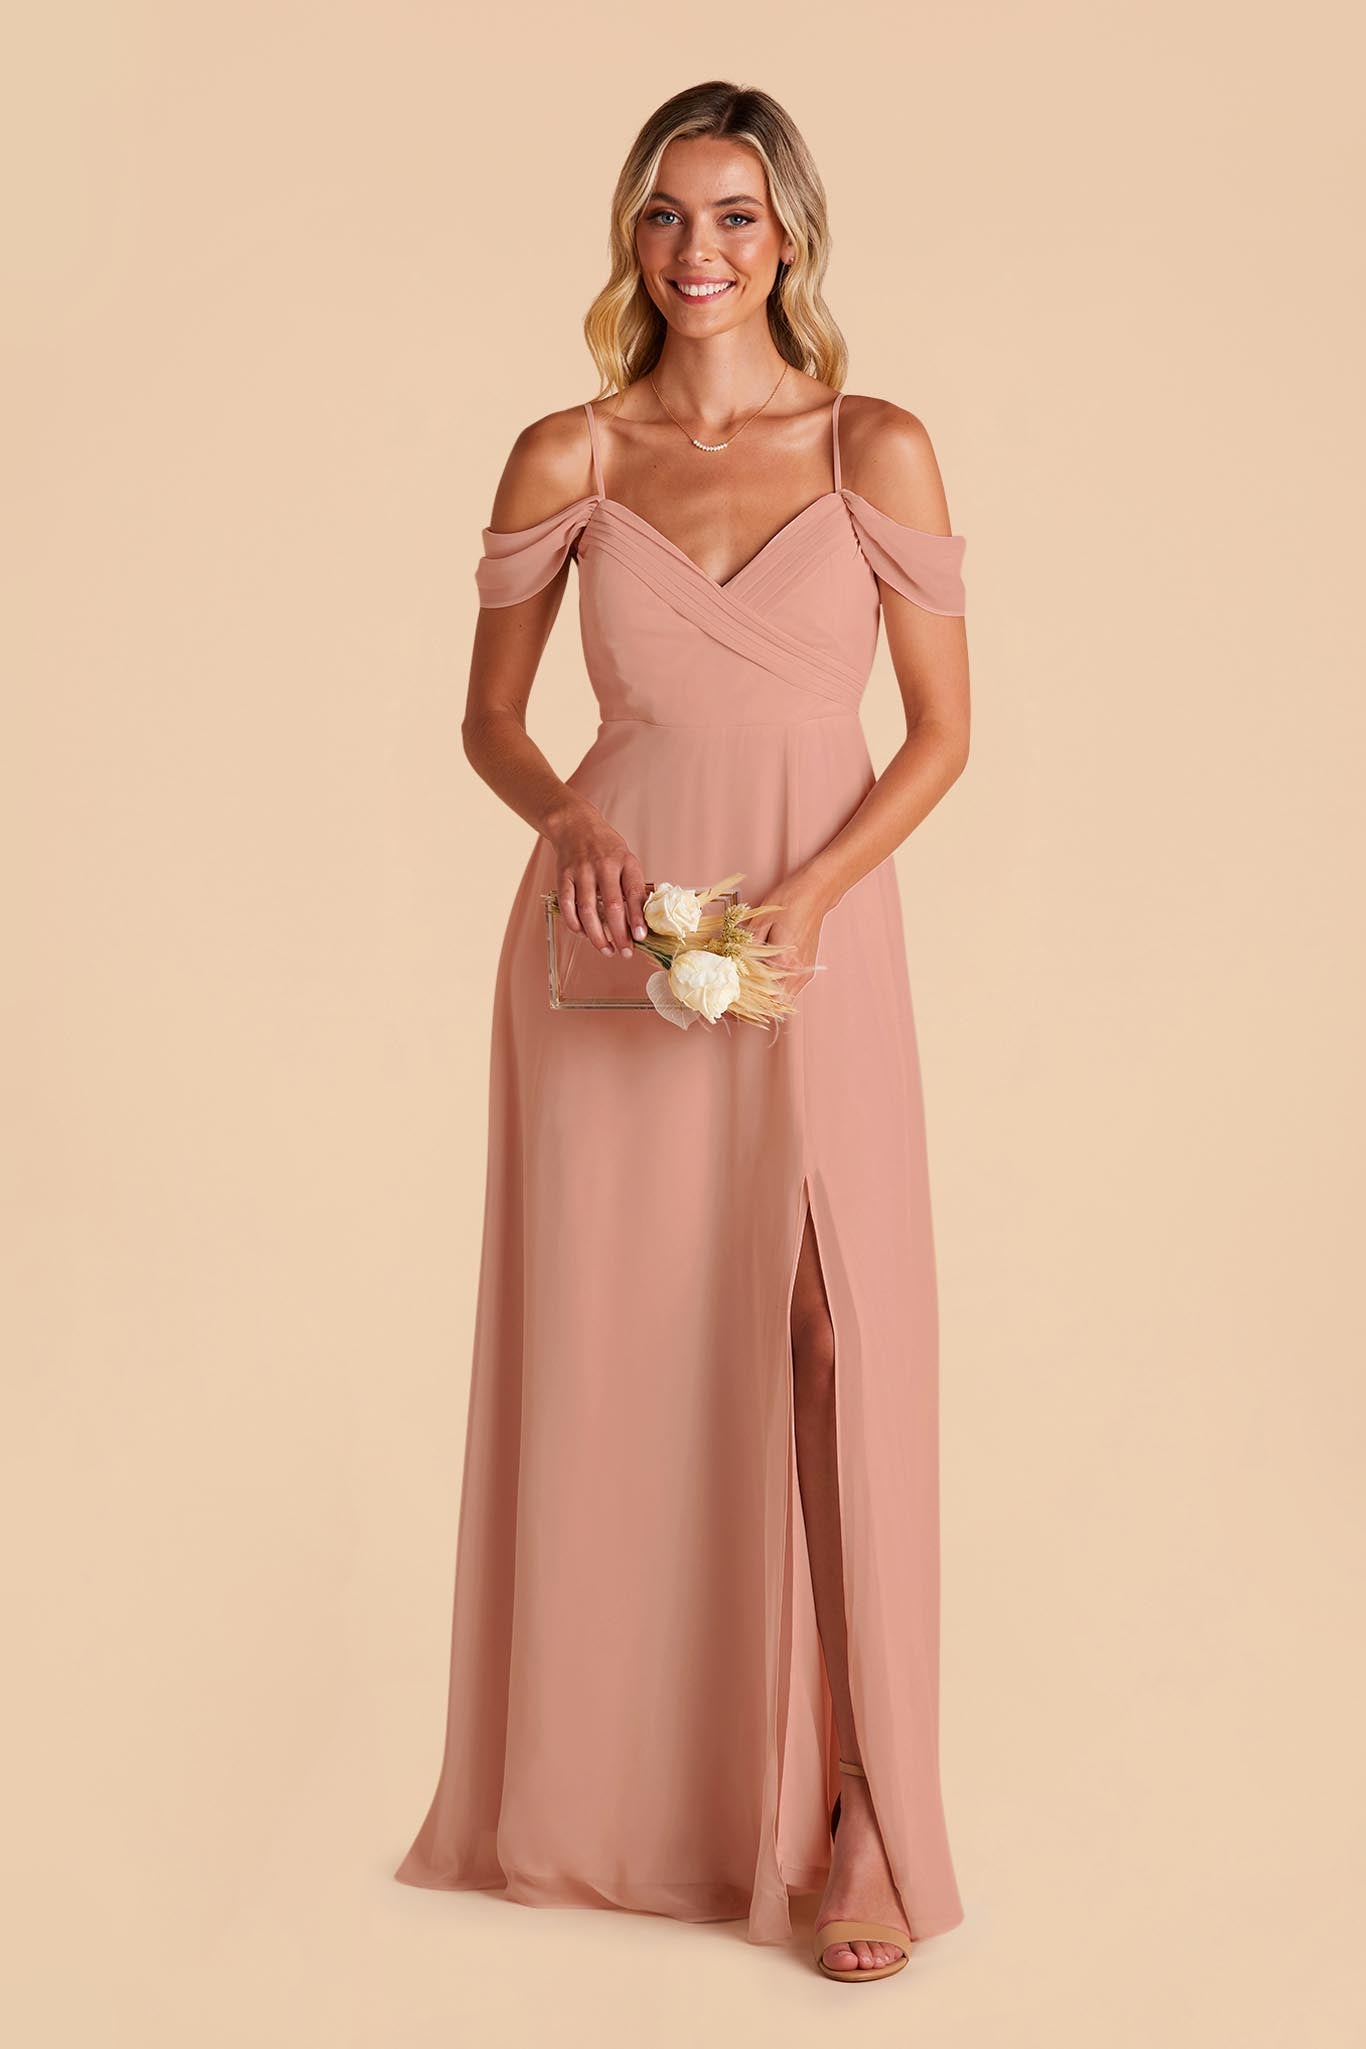 Dusty Rose Spence Convertible Dress by Birdy Grey